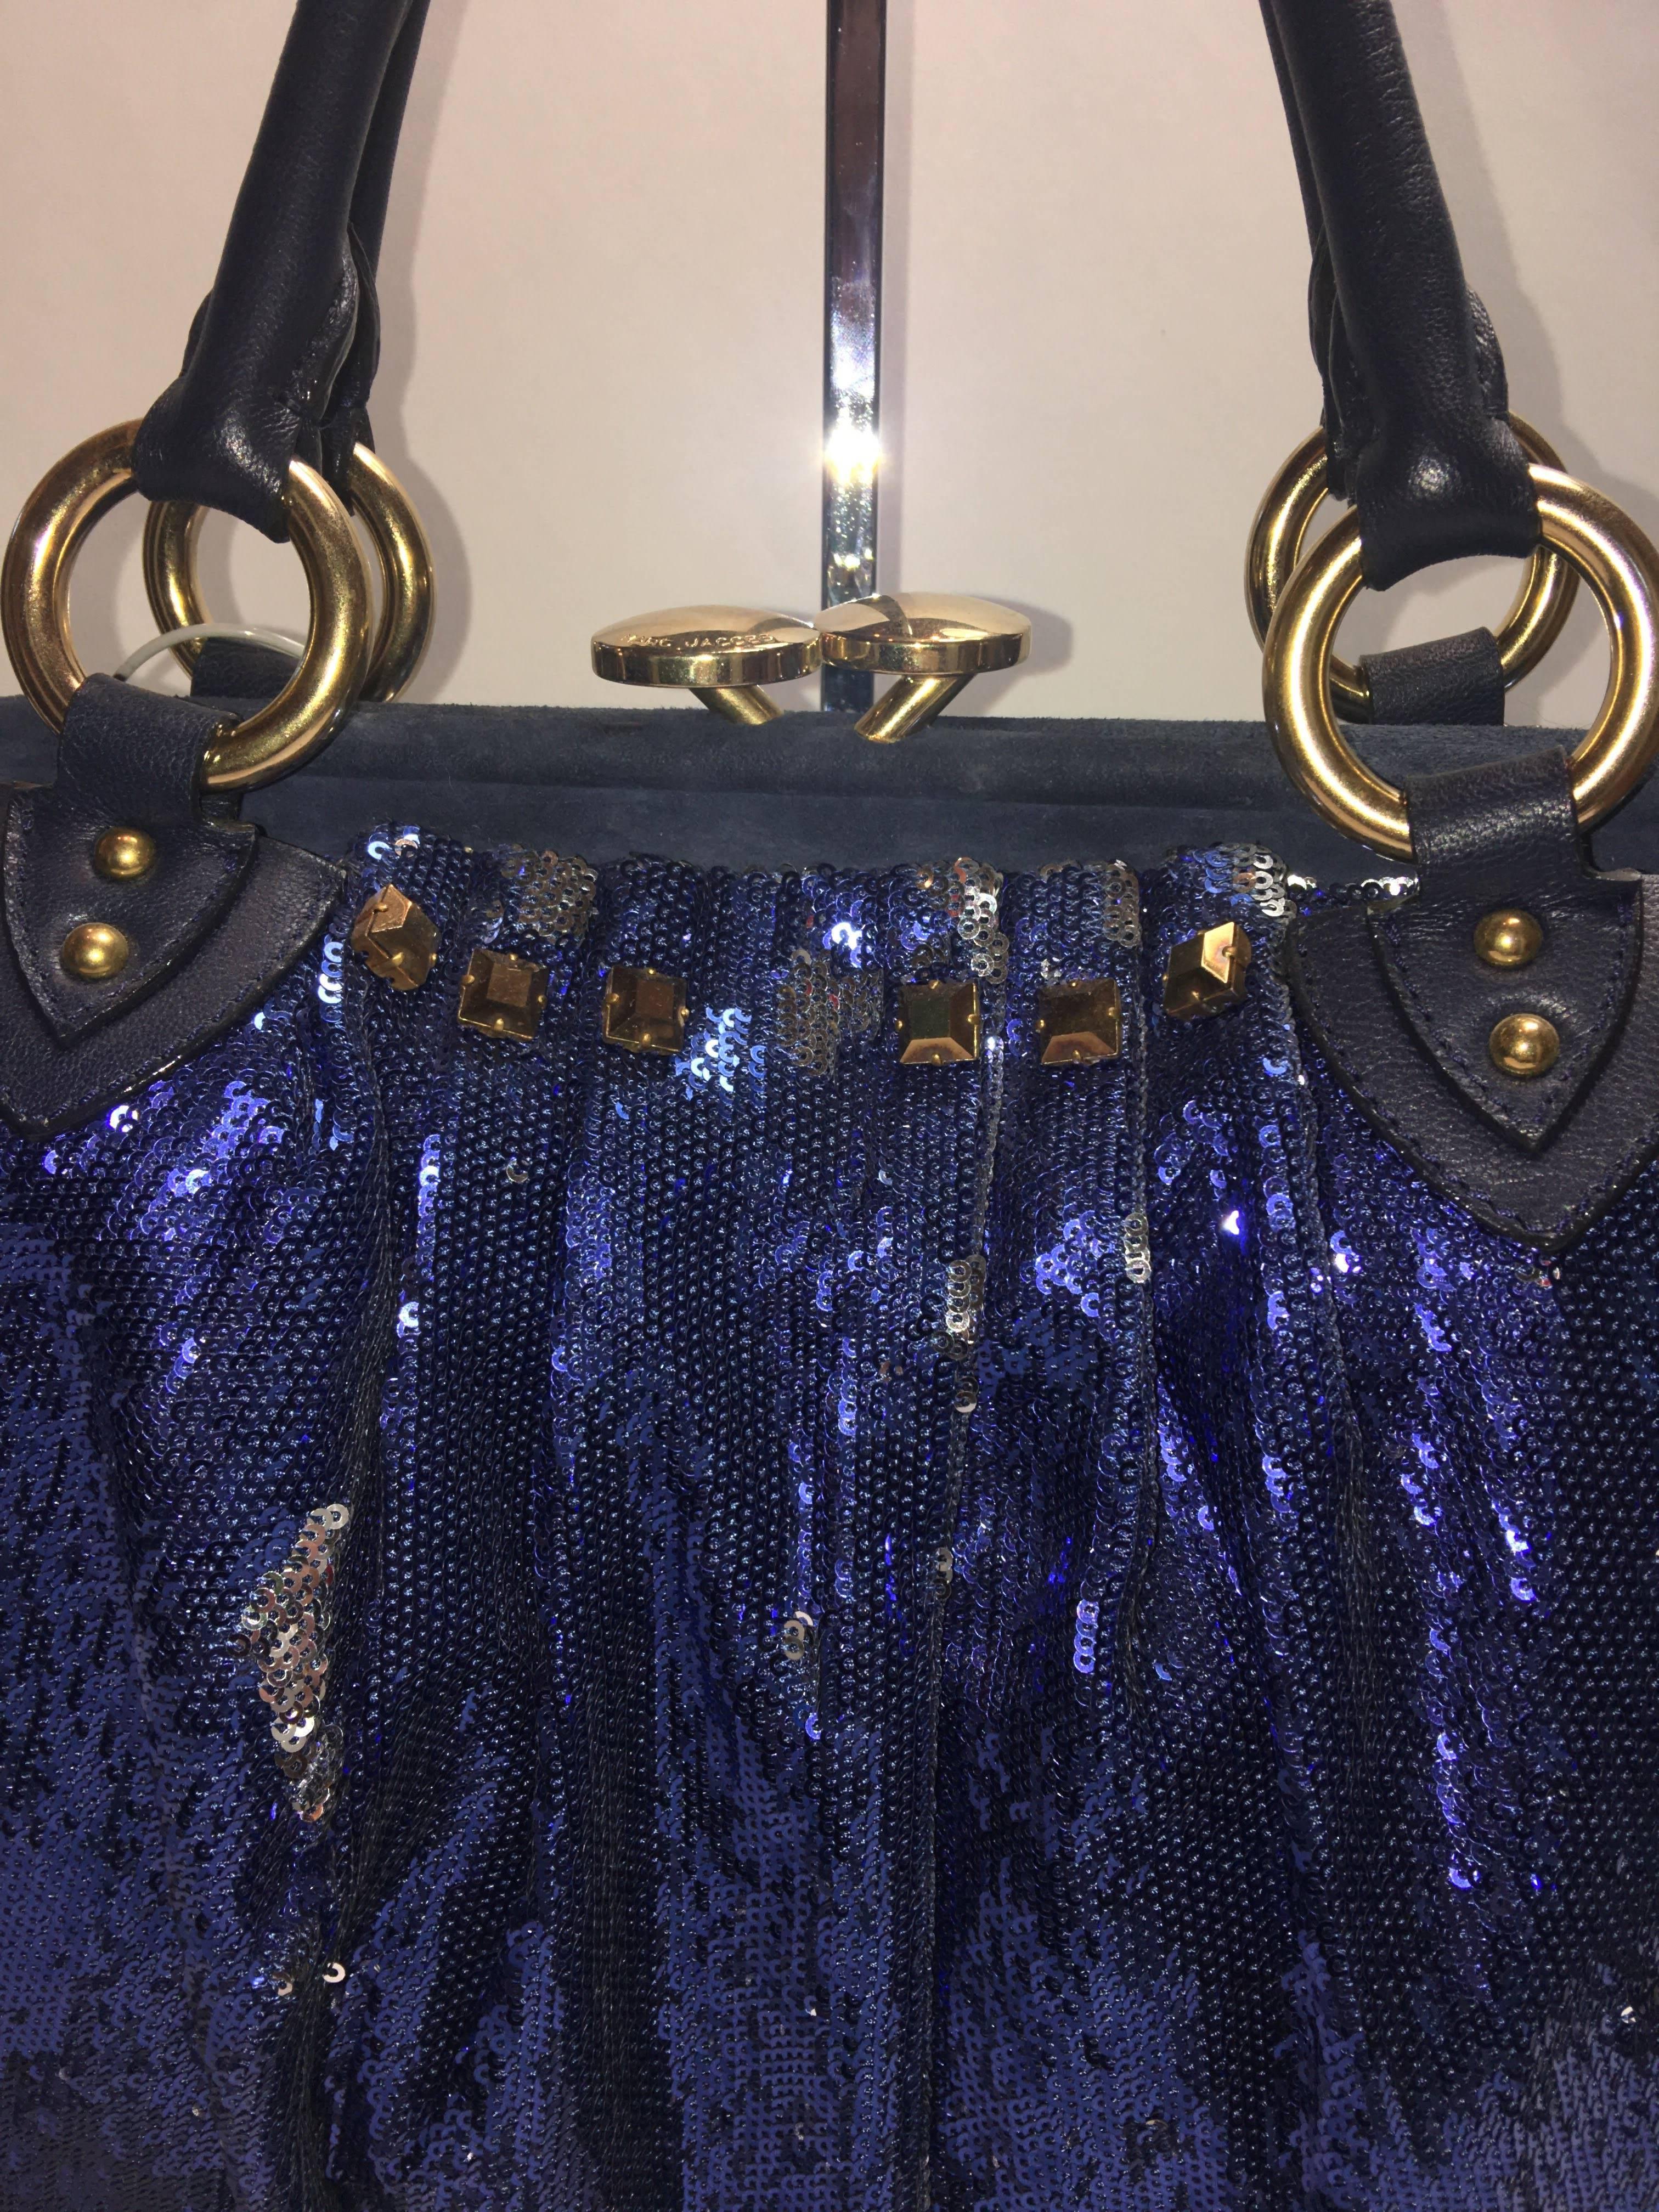 2010 Winter Collection Marc Jacobs Rocker Blue Sequin Stam Bag with Gold Hardware.